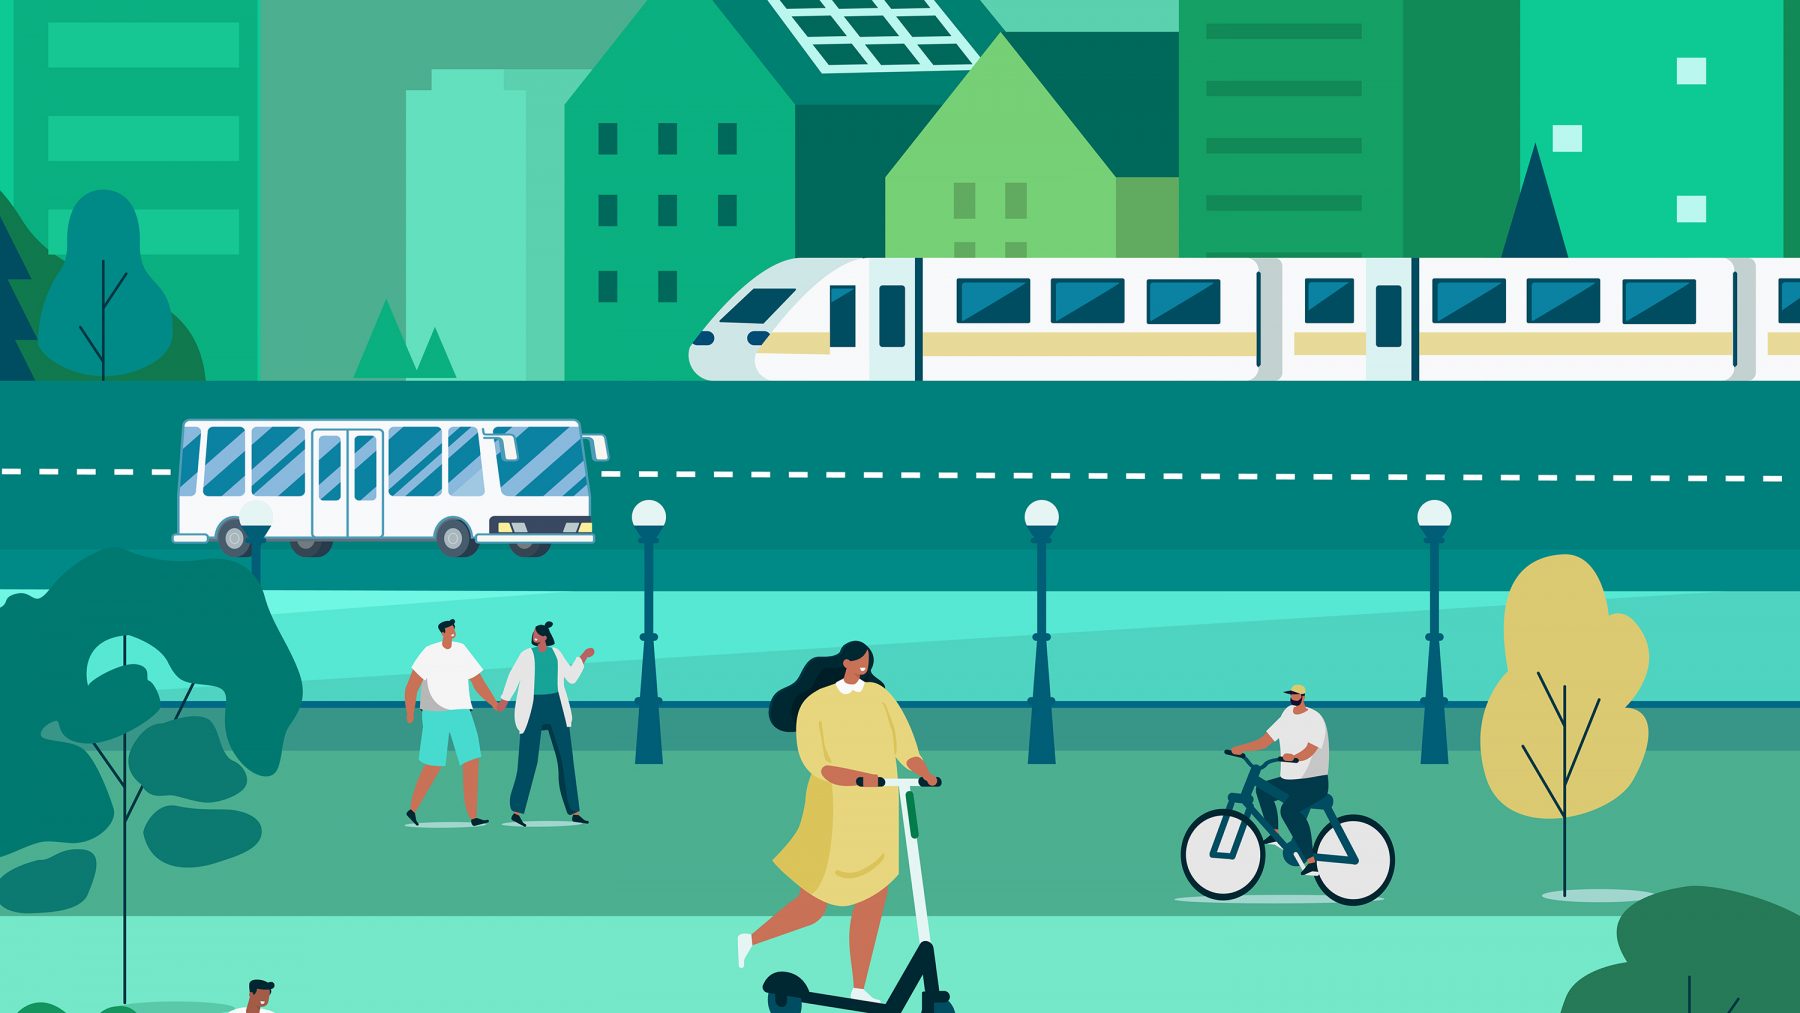 transportation monitoring graphic shows trains, buses, bikes and more